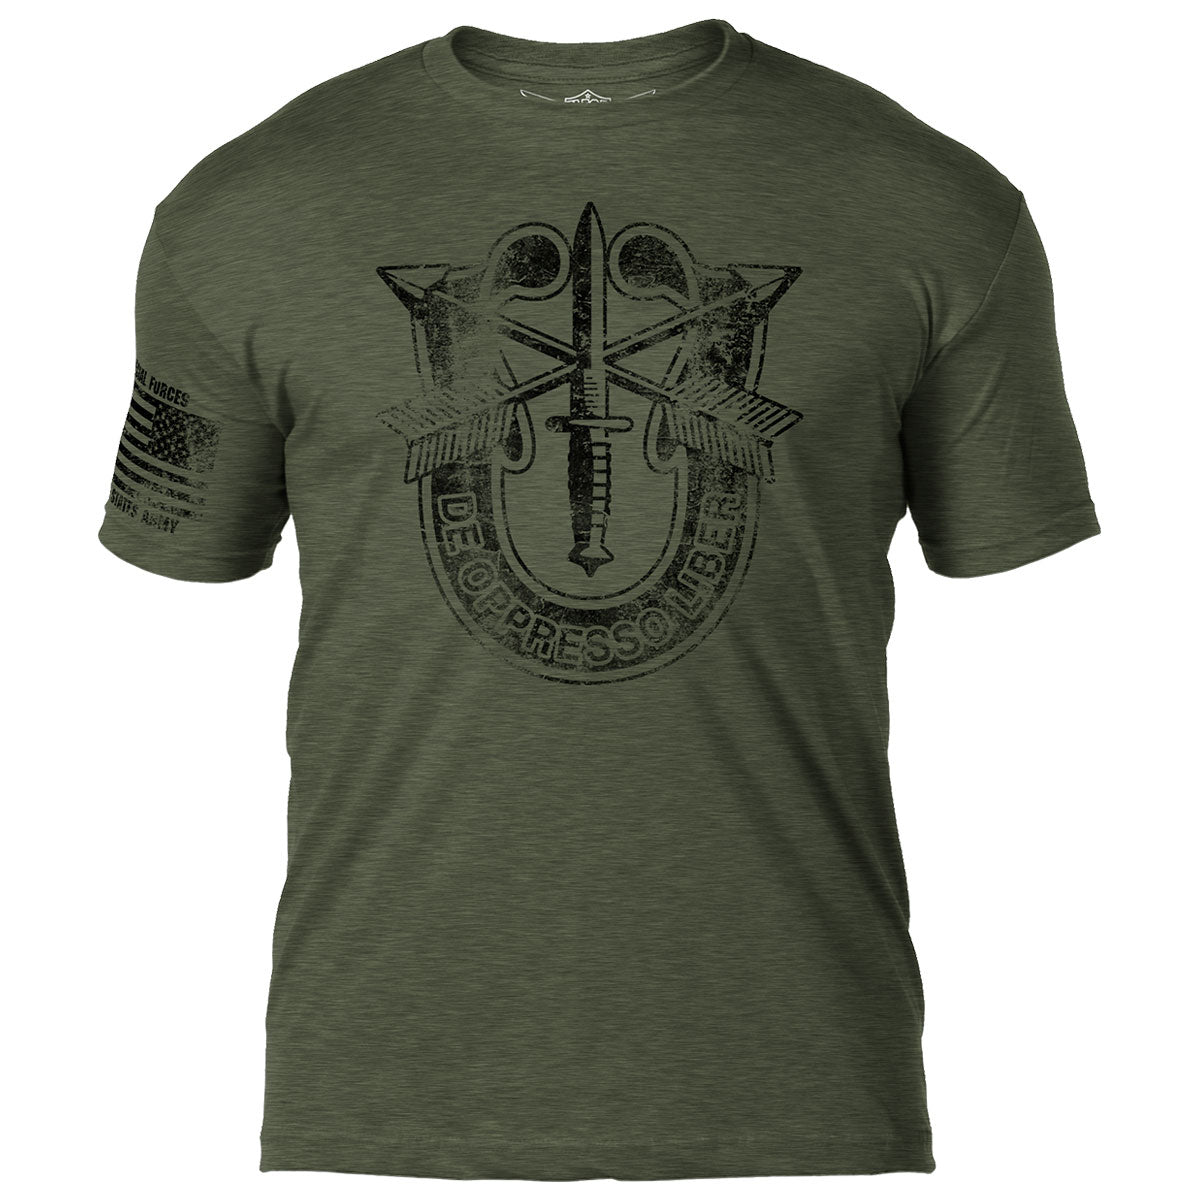 Army Special Forces 'Distressed' 7.62 Design Battlespace Men's T-Shirt  Small / Heather Military Green